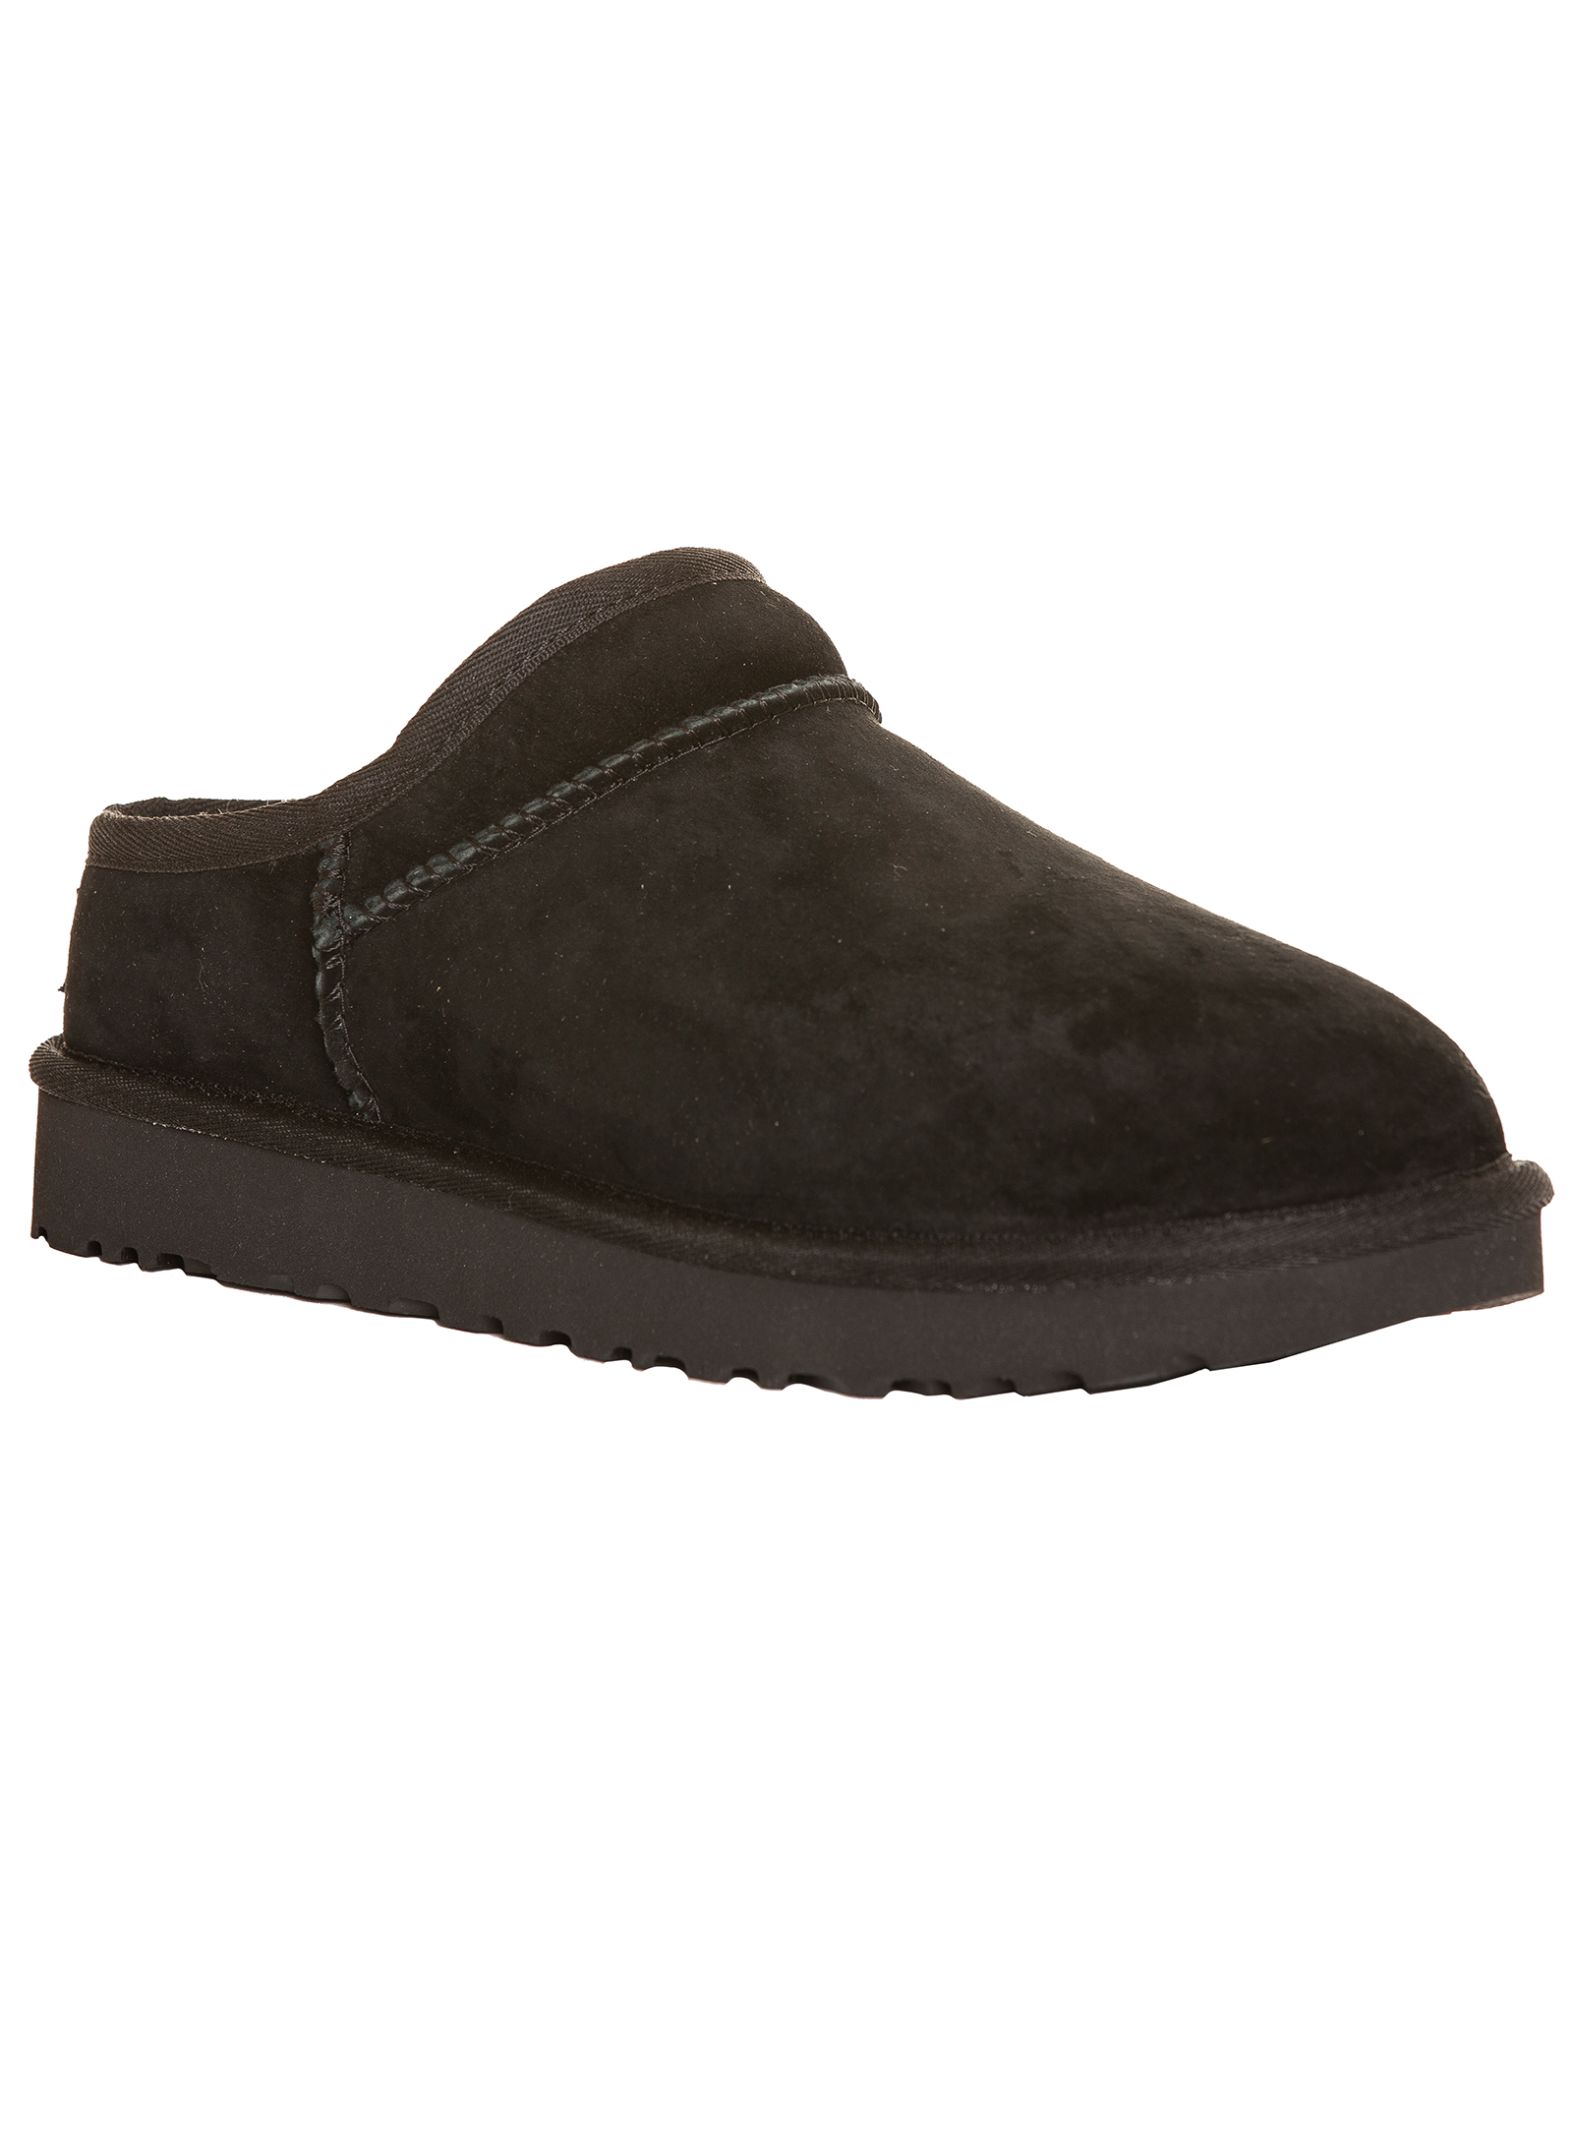 ugg classic slippers